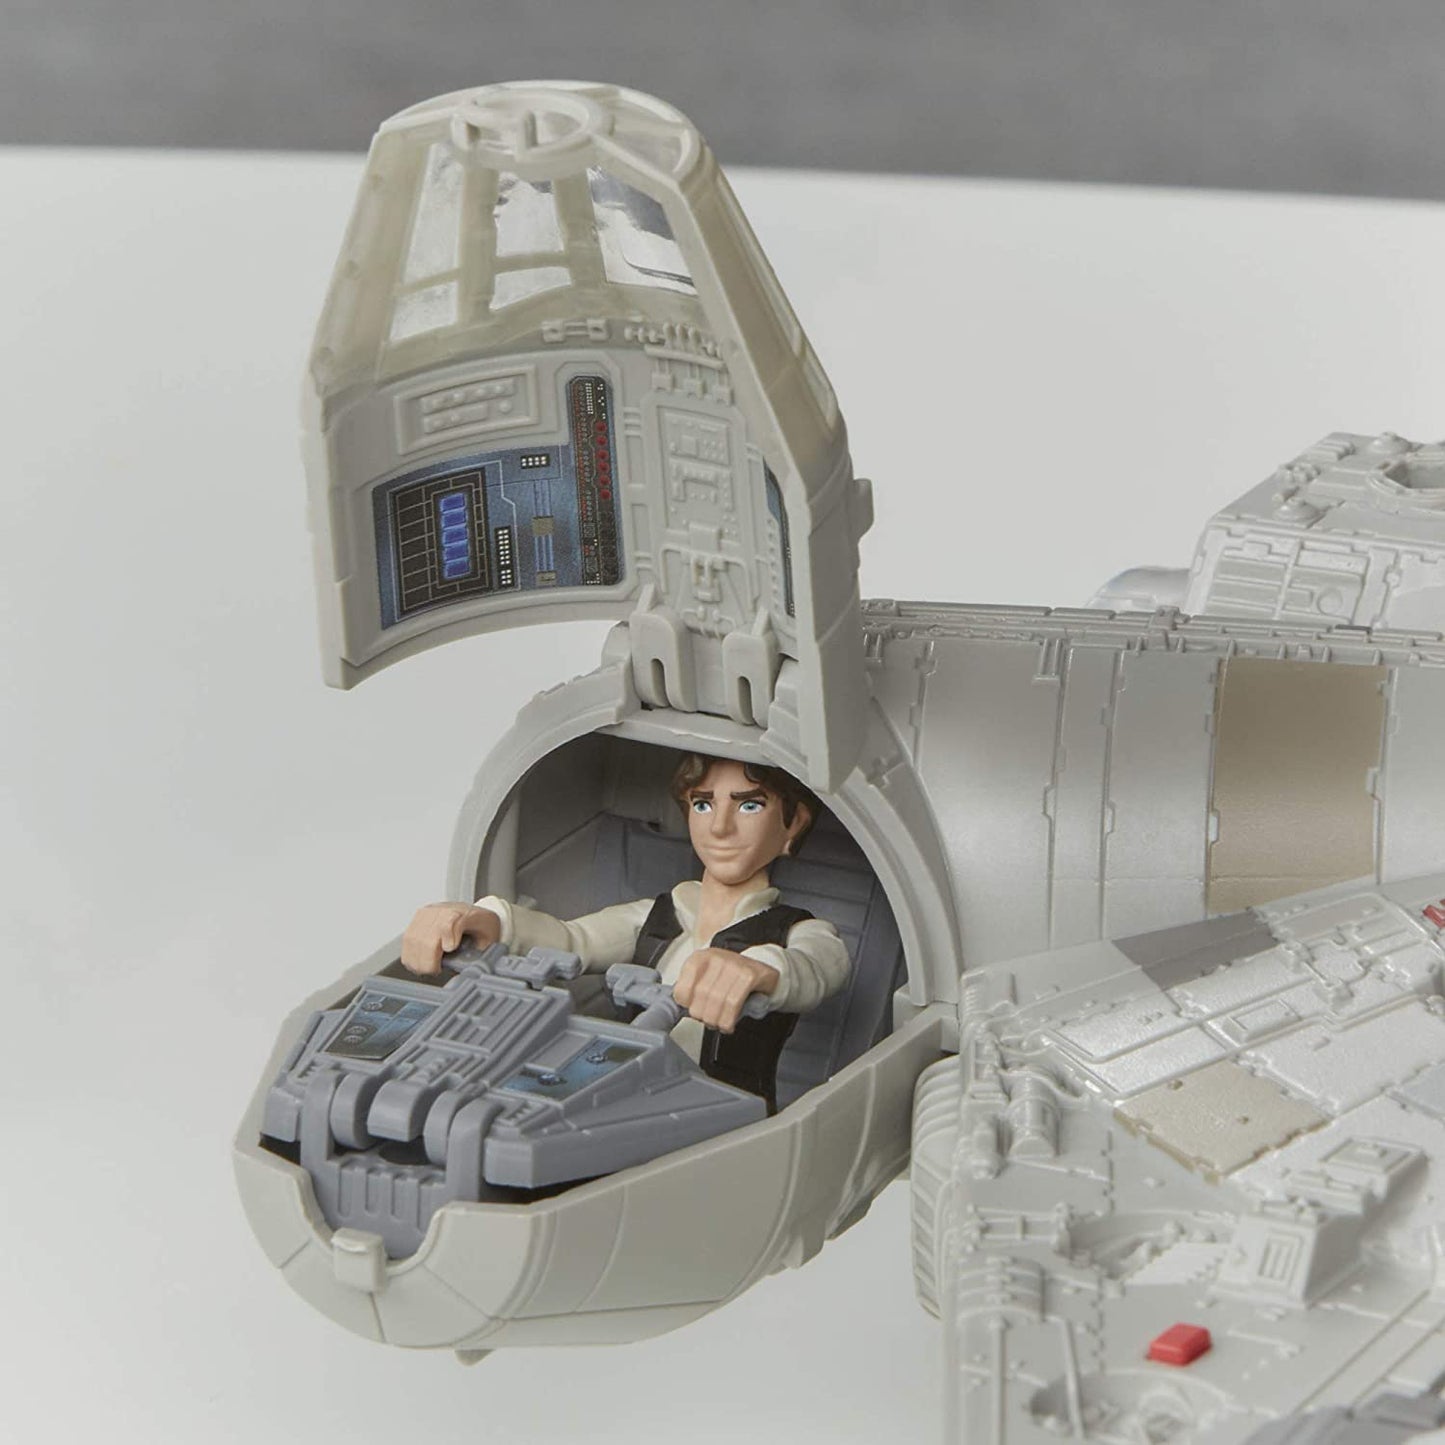 Star Wars Mission Fleet Han Solo Millennium Falcon 2.5-Inch-Scale Figure And Vehicle, Toys For Kids Ages 4 And Up -  - The Hooded Goblin